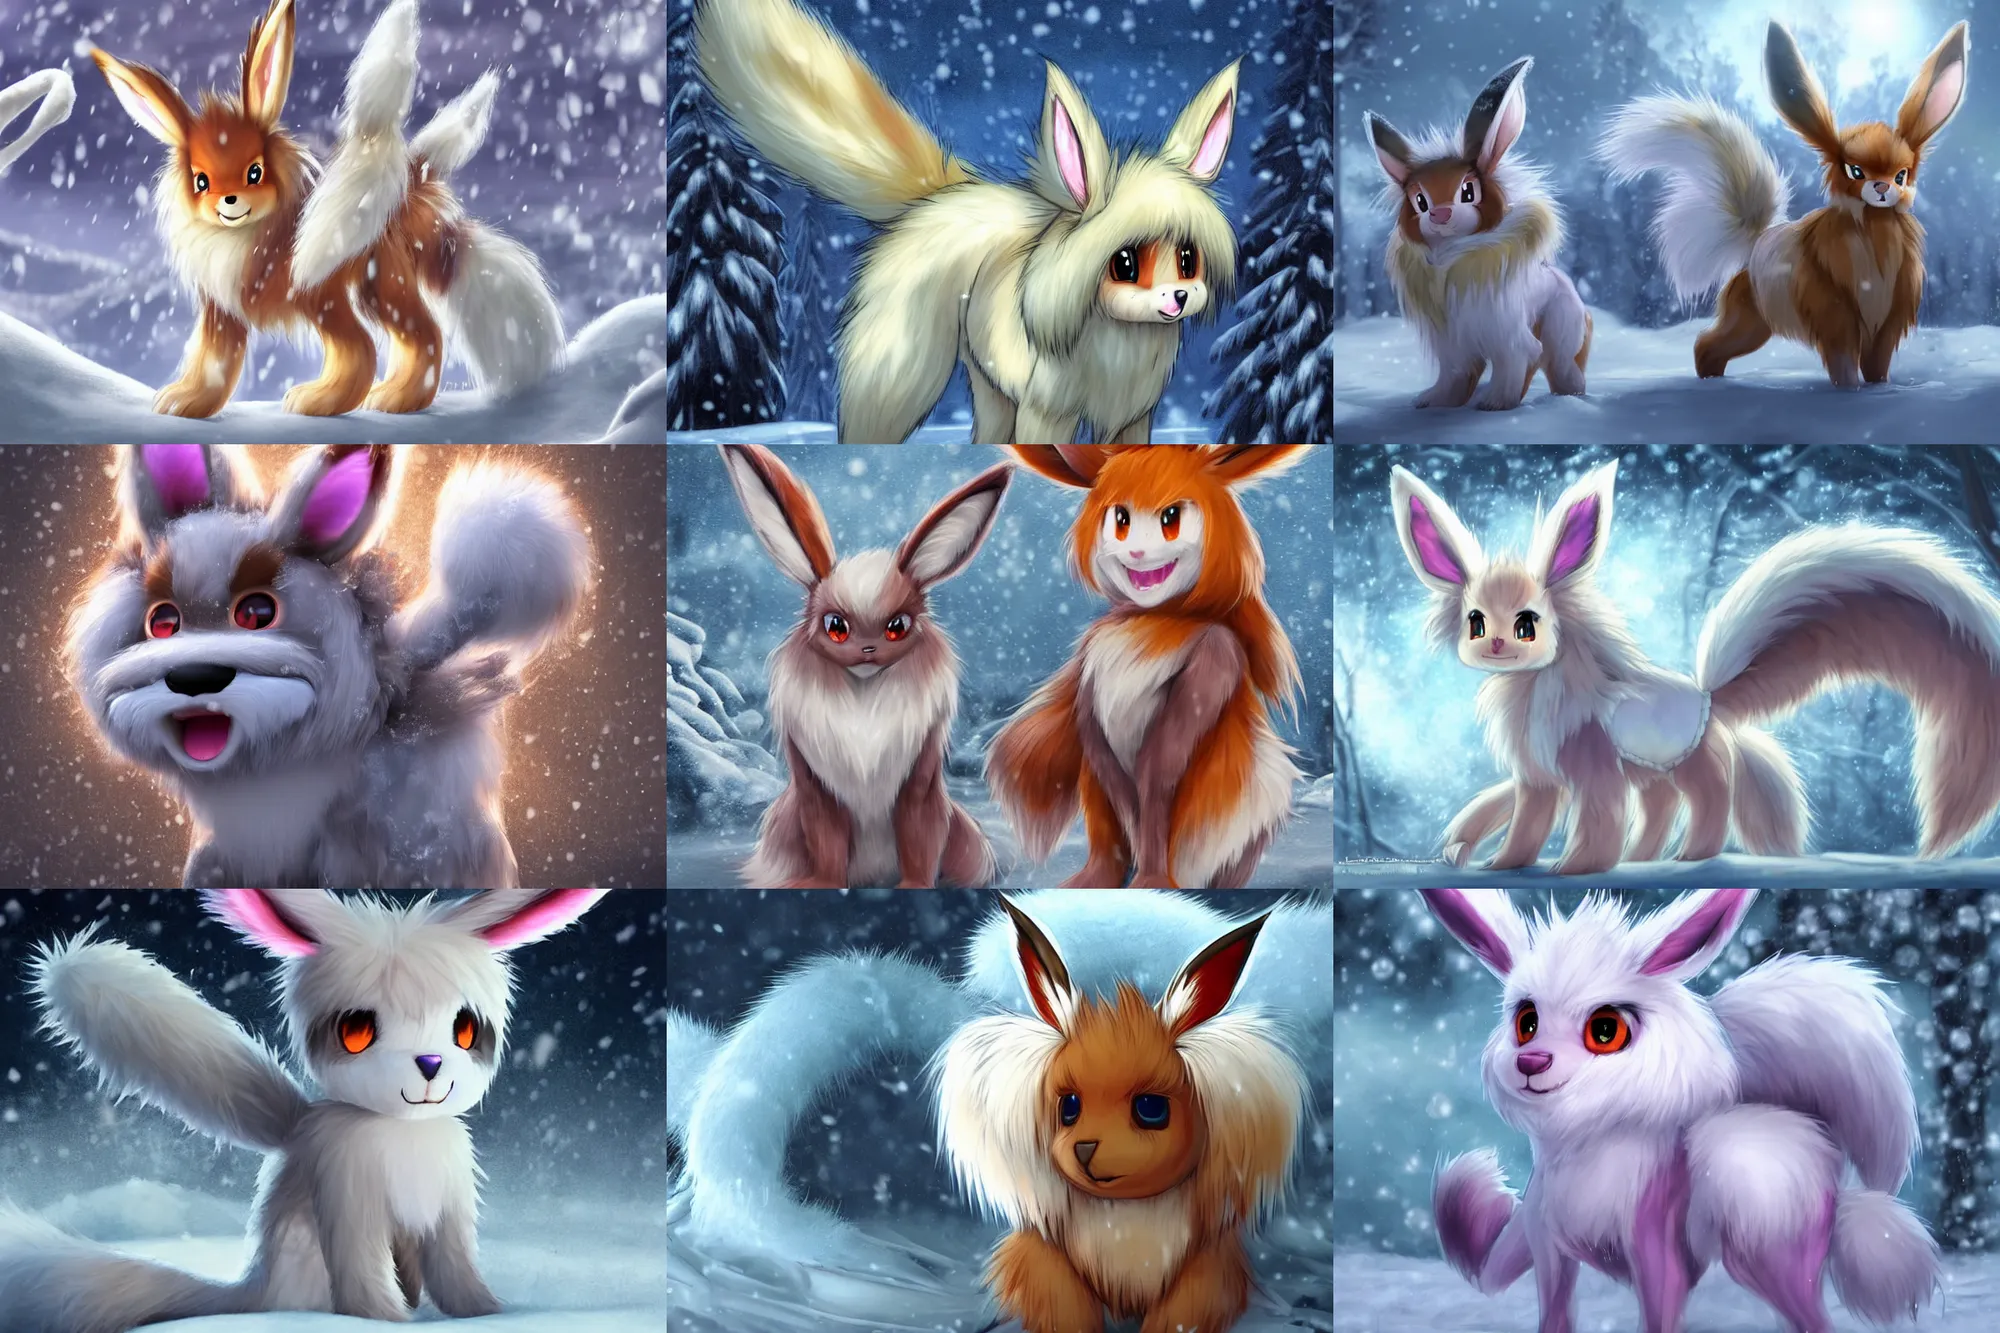 Prompt: fan art rendering of a frosty anthro fuzzy eevee evil comb sitting in snow eevee high resolution anthro eevee humanoid, CGsociety UHD 4K highly detailed, intricate heterochromia sad, watery eyes with clawed finger in nose eevee anthro standing up poofy synthetic fur tail bloody fur wearing bow braided tail looking down bleeding eevee anthro tongue sticking out wearing a sash smiling in winter facing the moon zions national